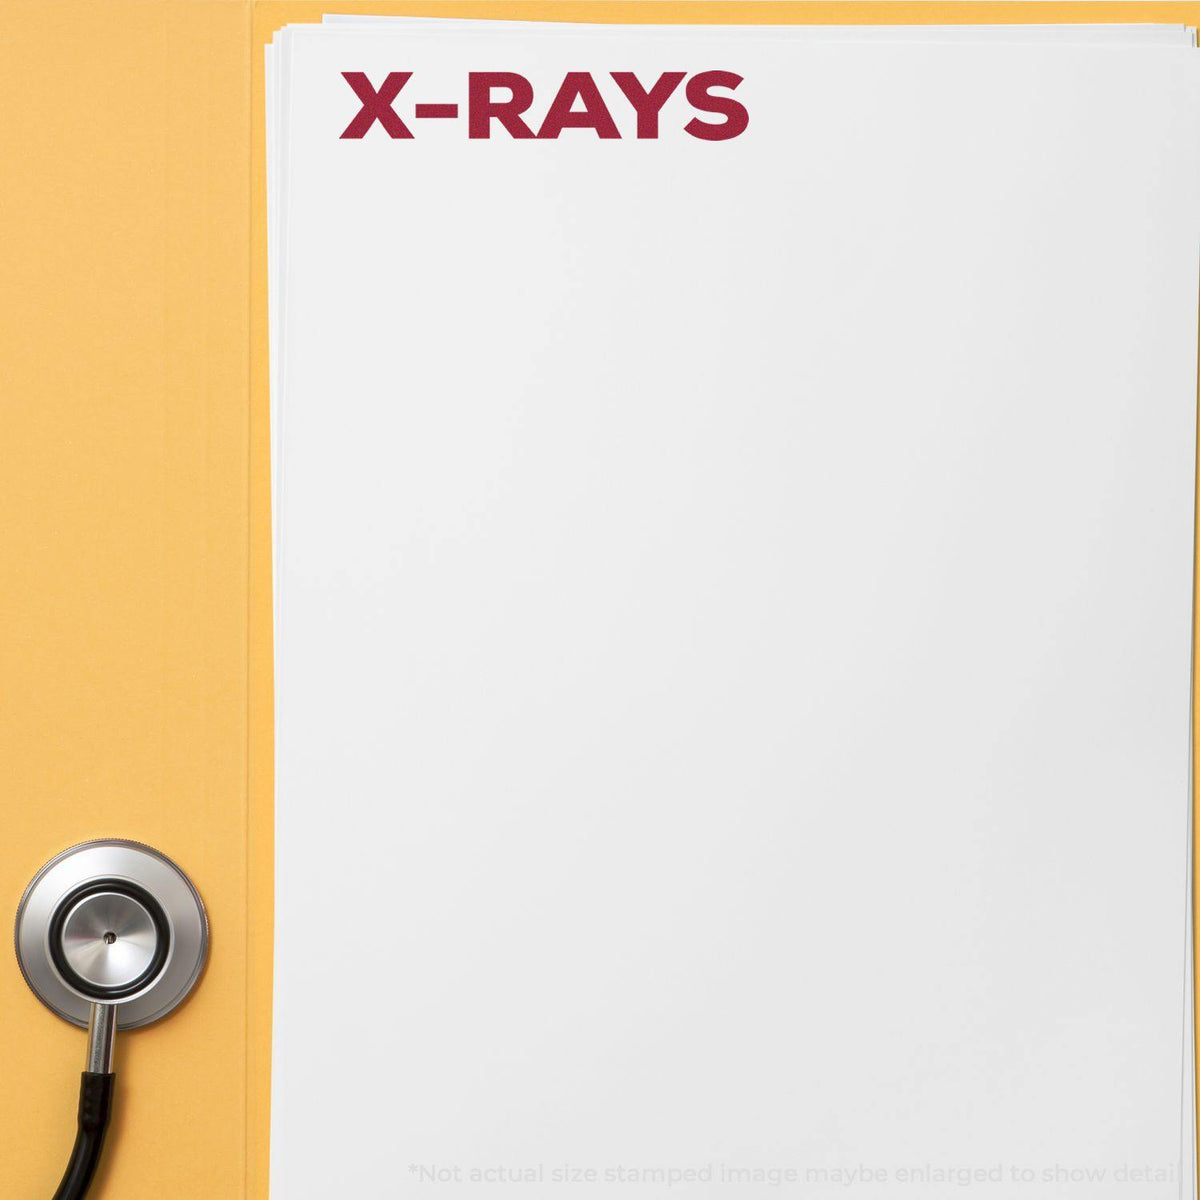 Bold X-Rays Rubber Stamp In Use Photo